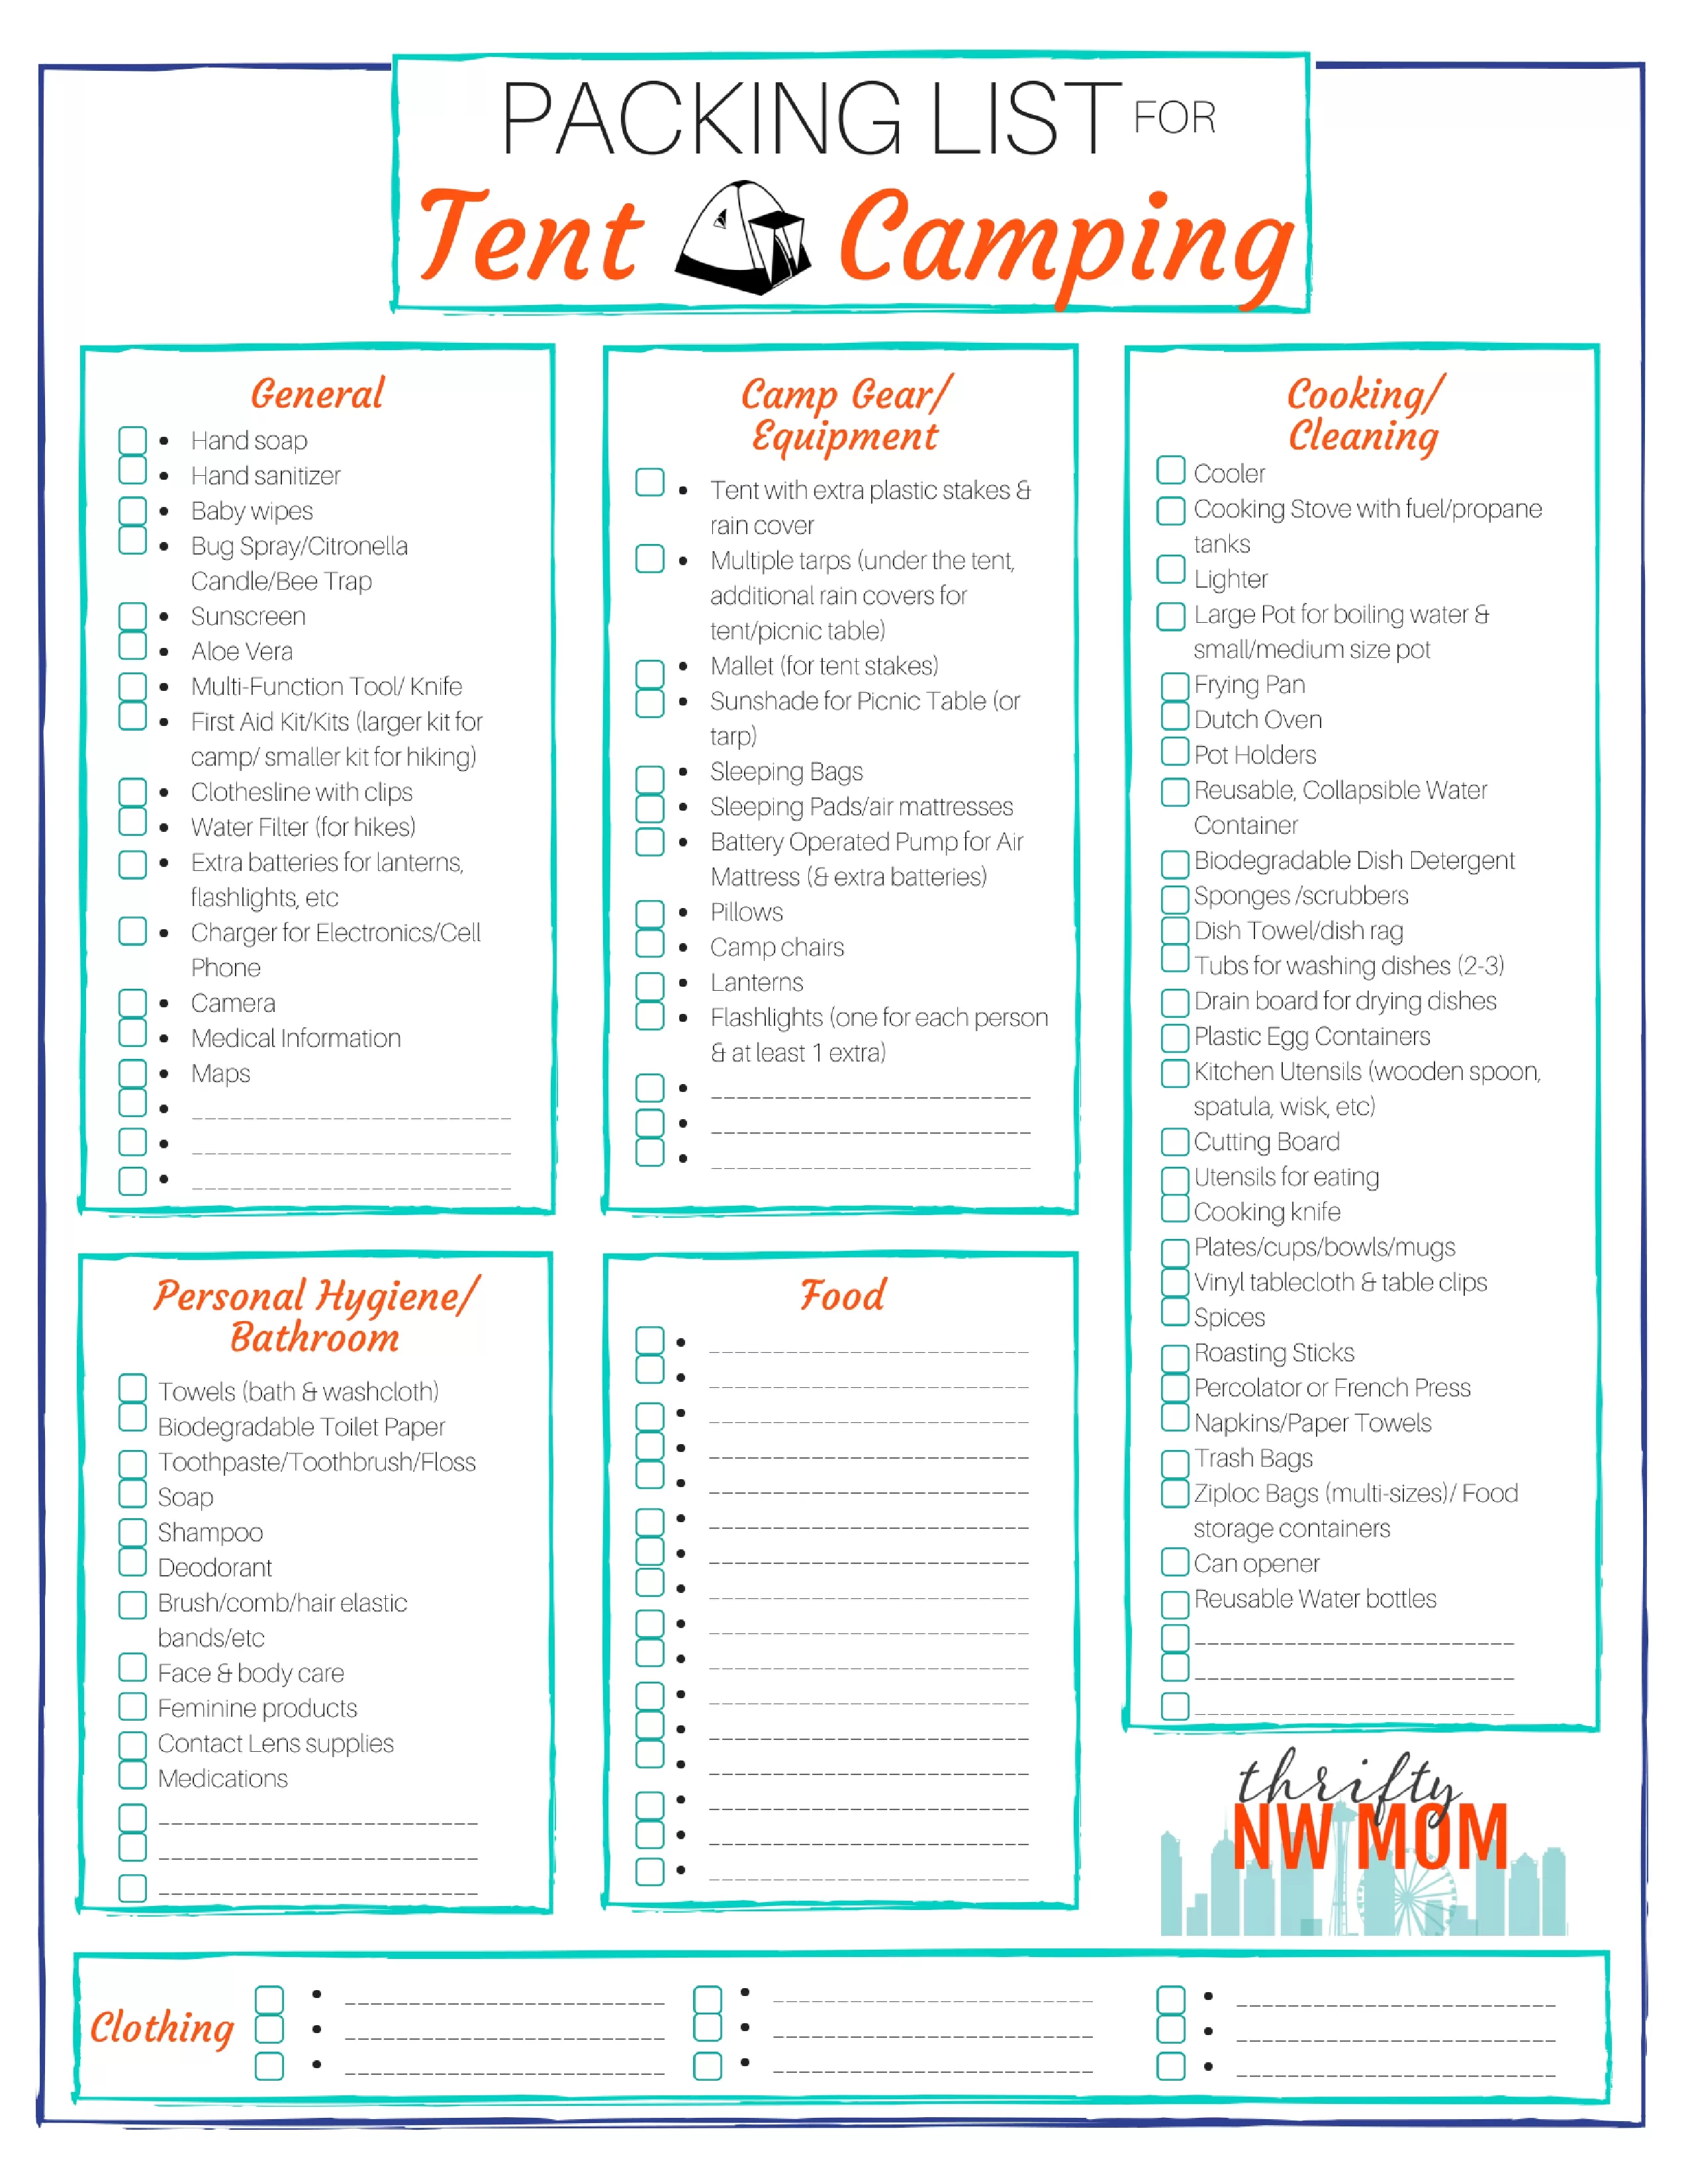 Camping Packing List for Travel + Road Trips - Top Rope Media